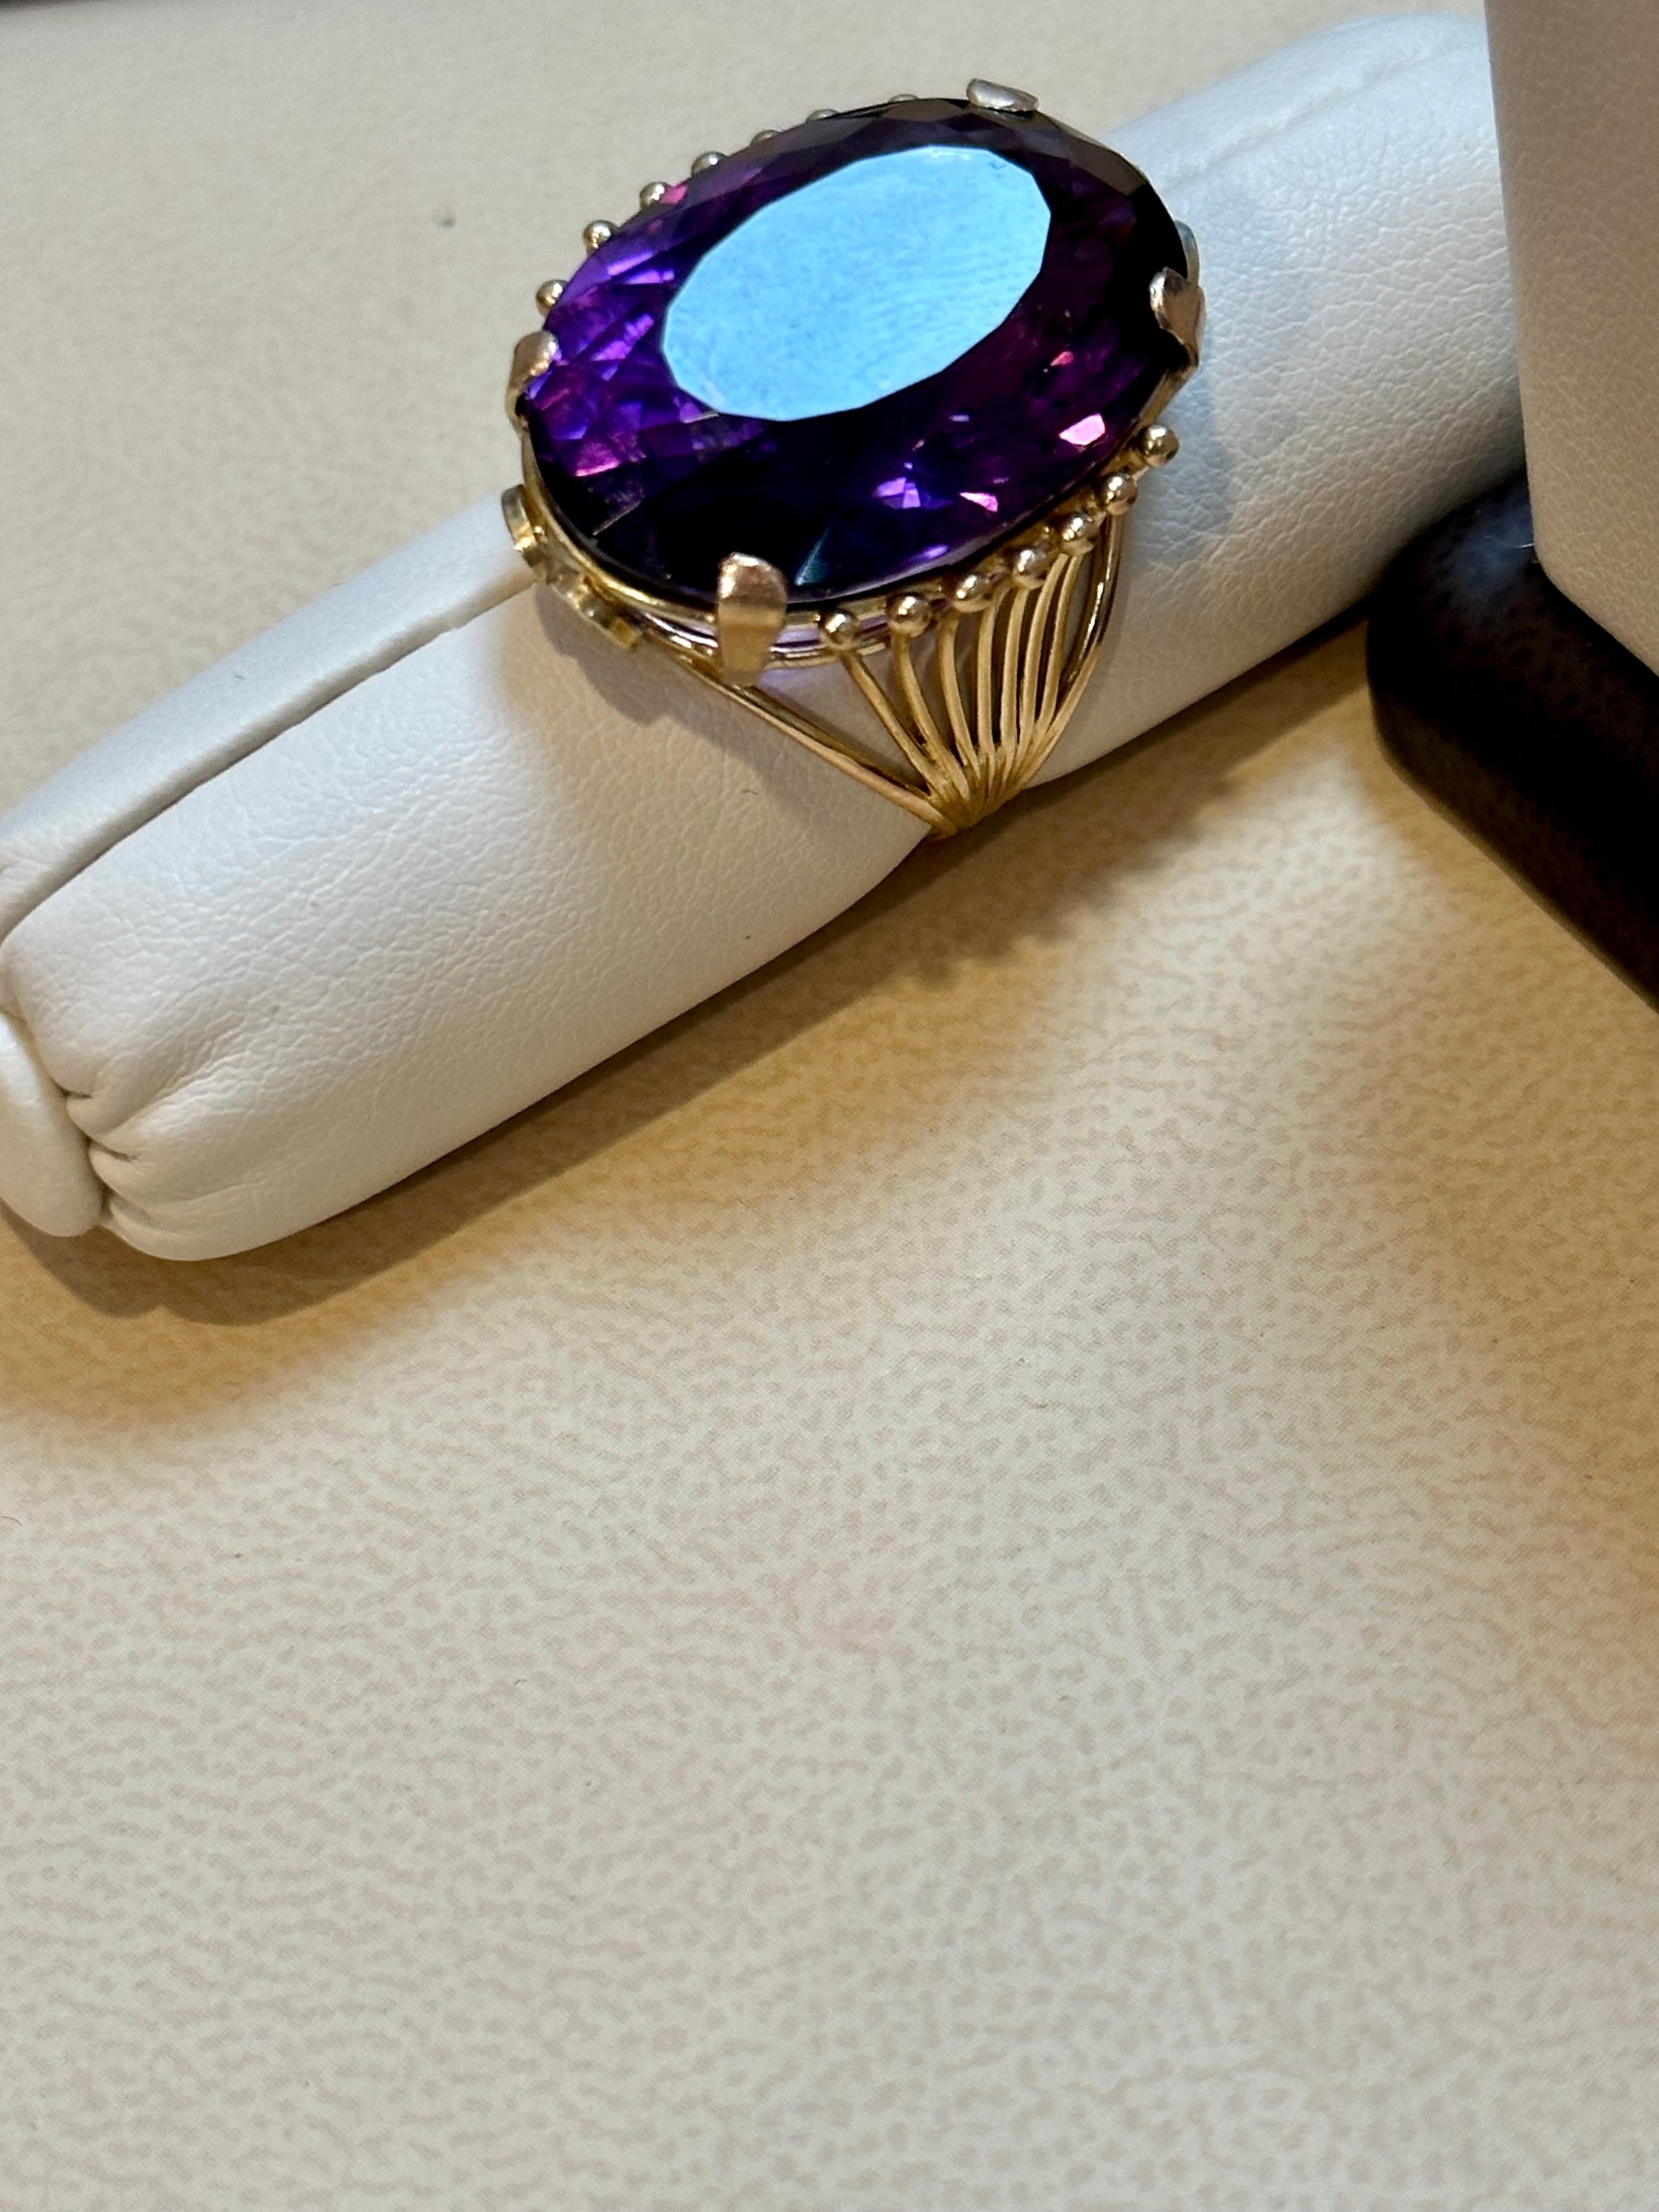 27 Carat Amethyst Cocktail Ring in 14 Karat Yellow Gold In Excellent Condition For Sale In New York, NY